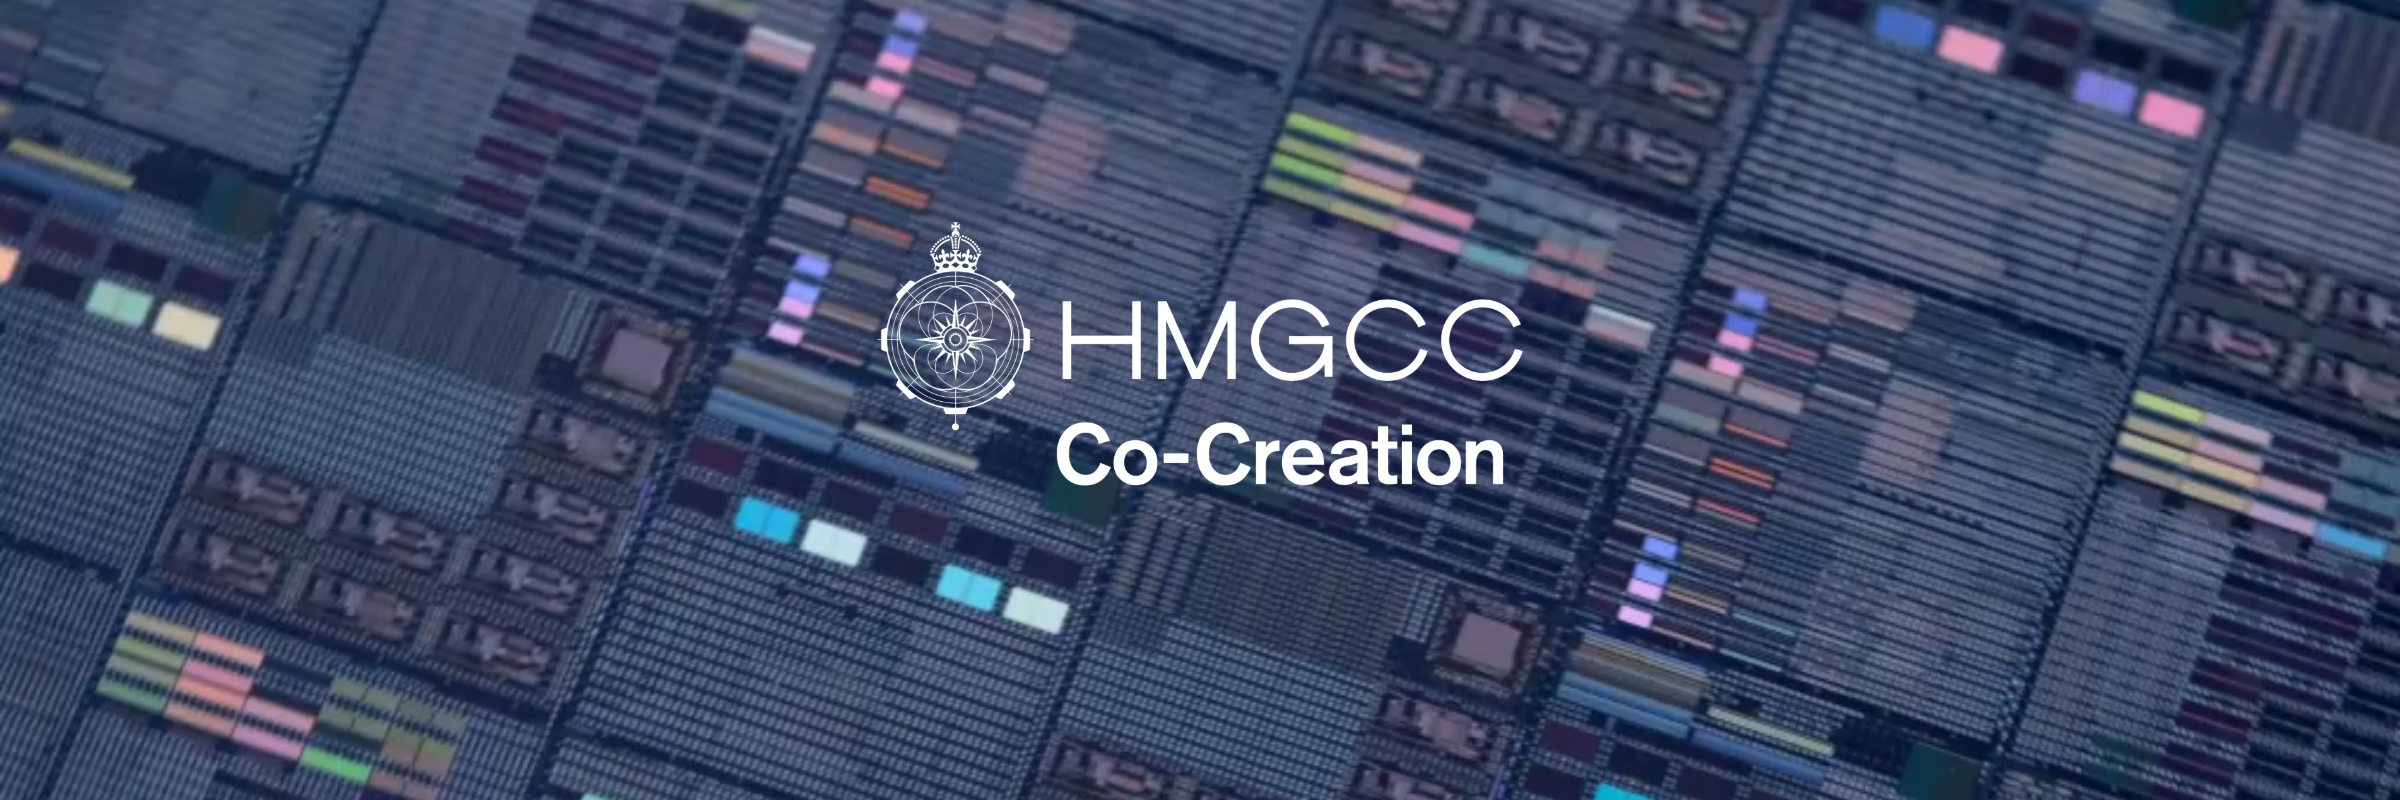 HMGCC Co-Creation logo against a backdrop of a printed circuit board